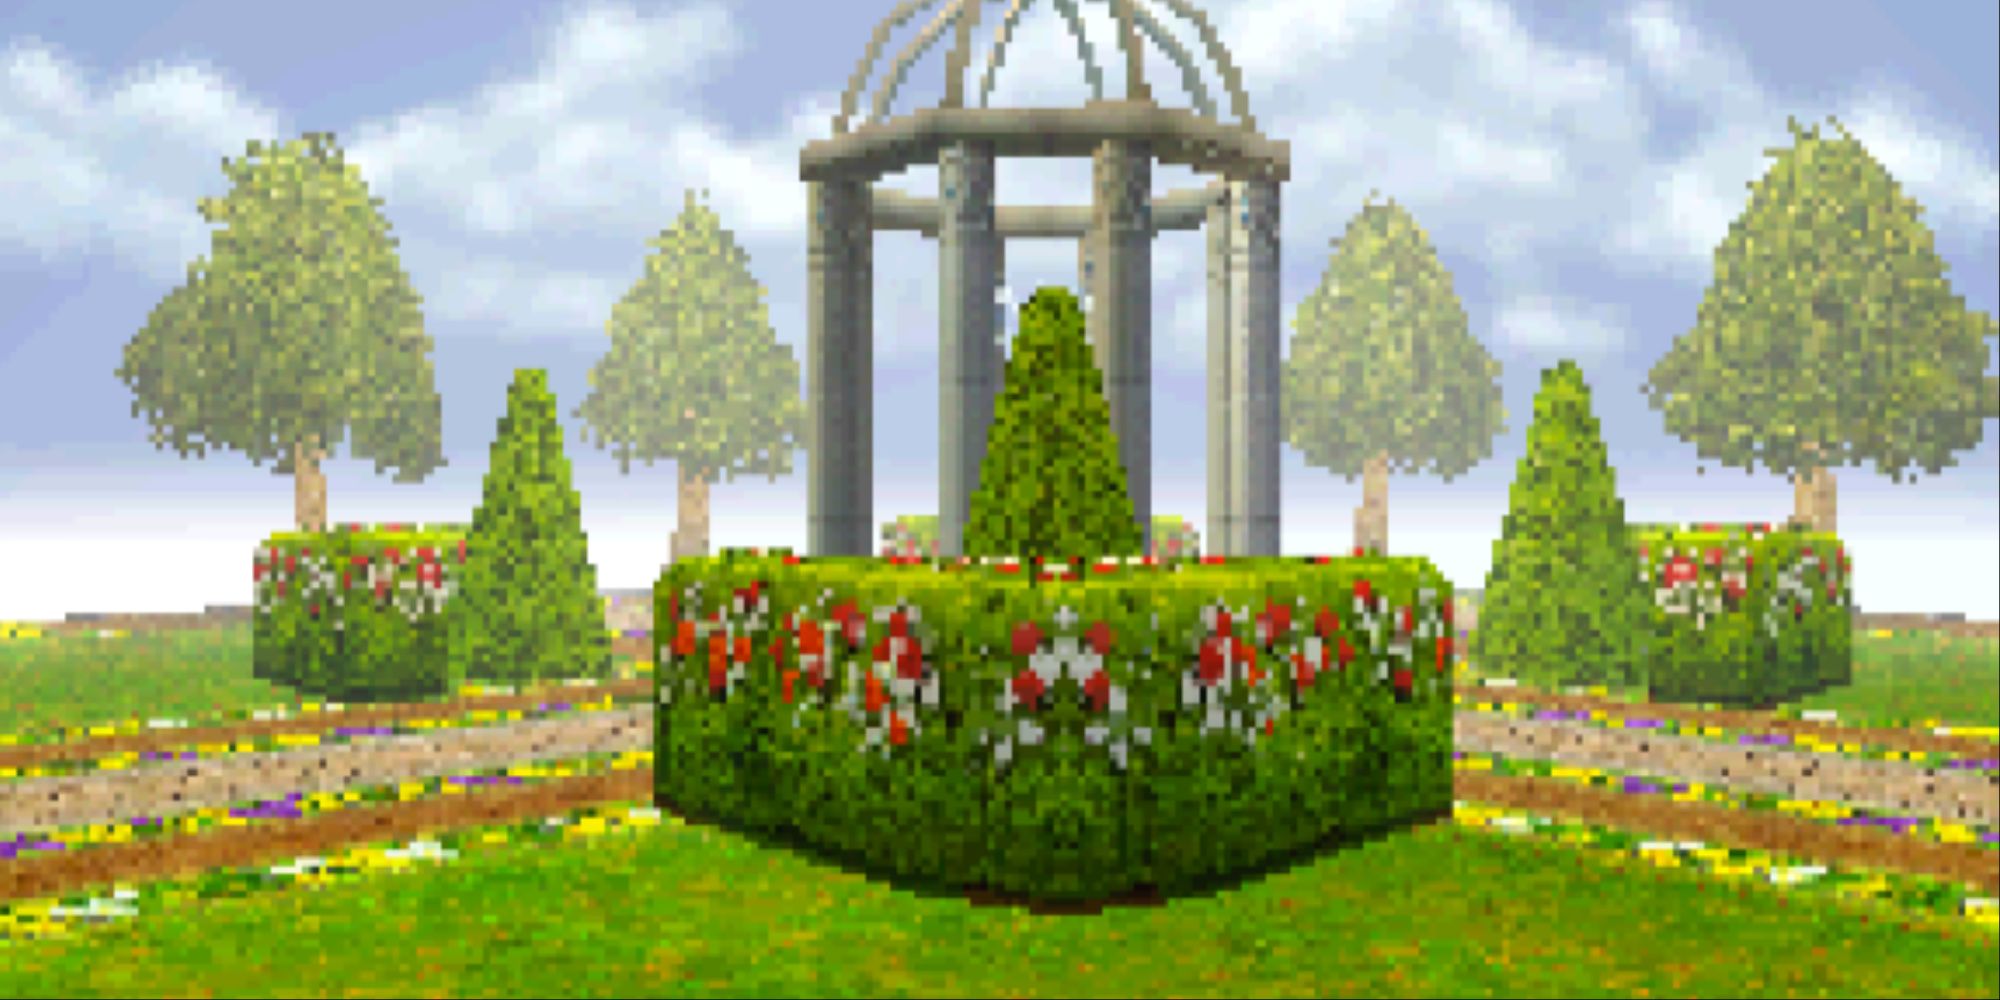 Exploring the garden in Deep Labyrinth